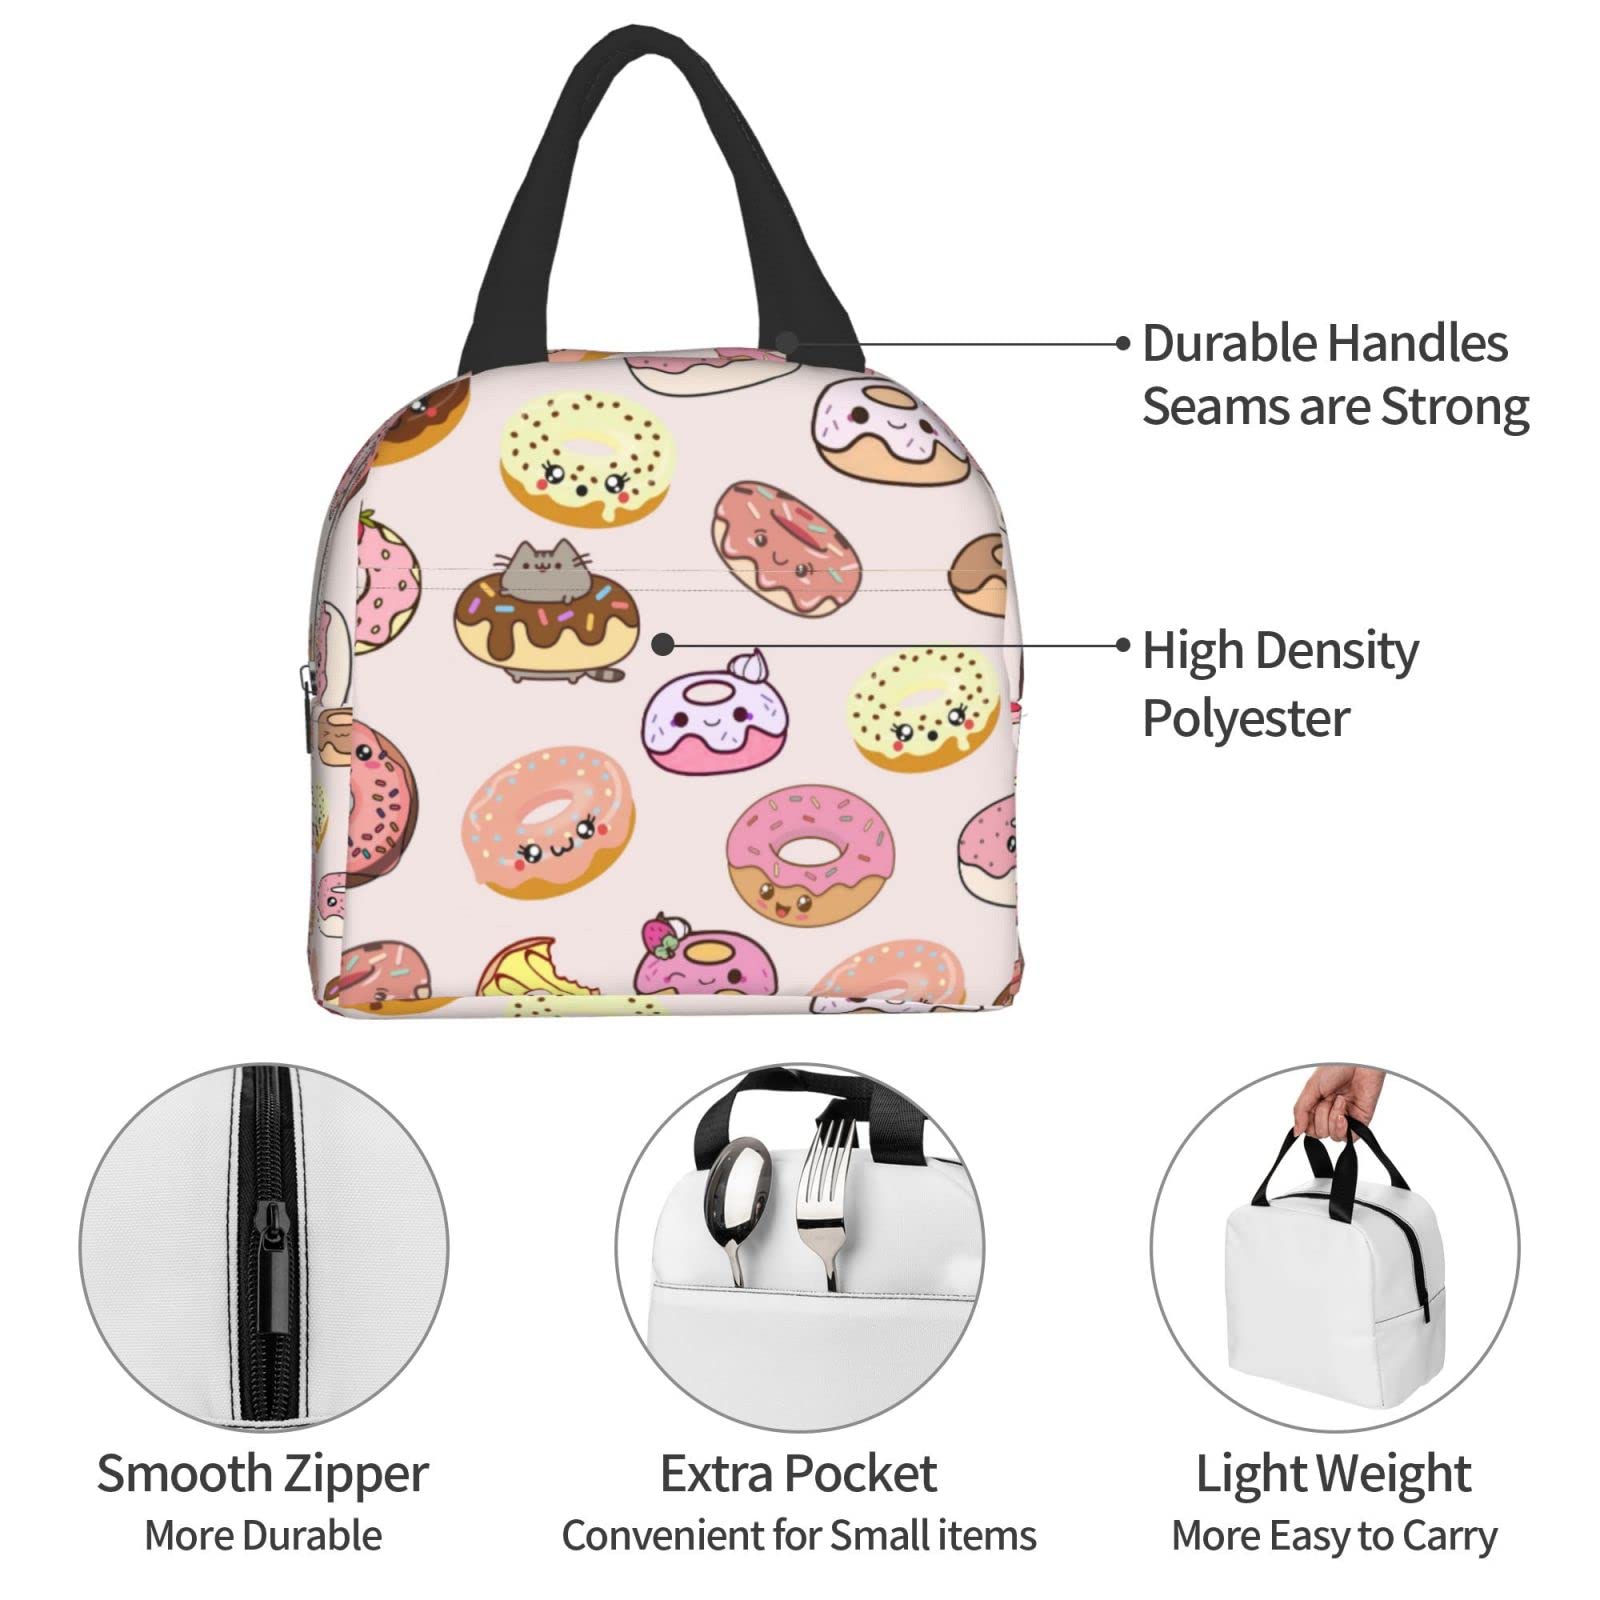 Donuts Lunch Box Insulated Lunch Bag for Kids Teens Girls Boys Women Cooler Reusable LunchBox for School Office Beach Travel